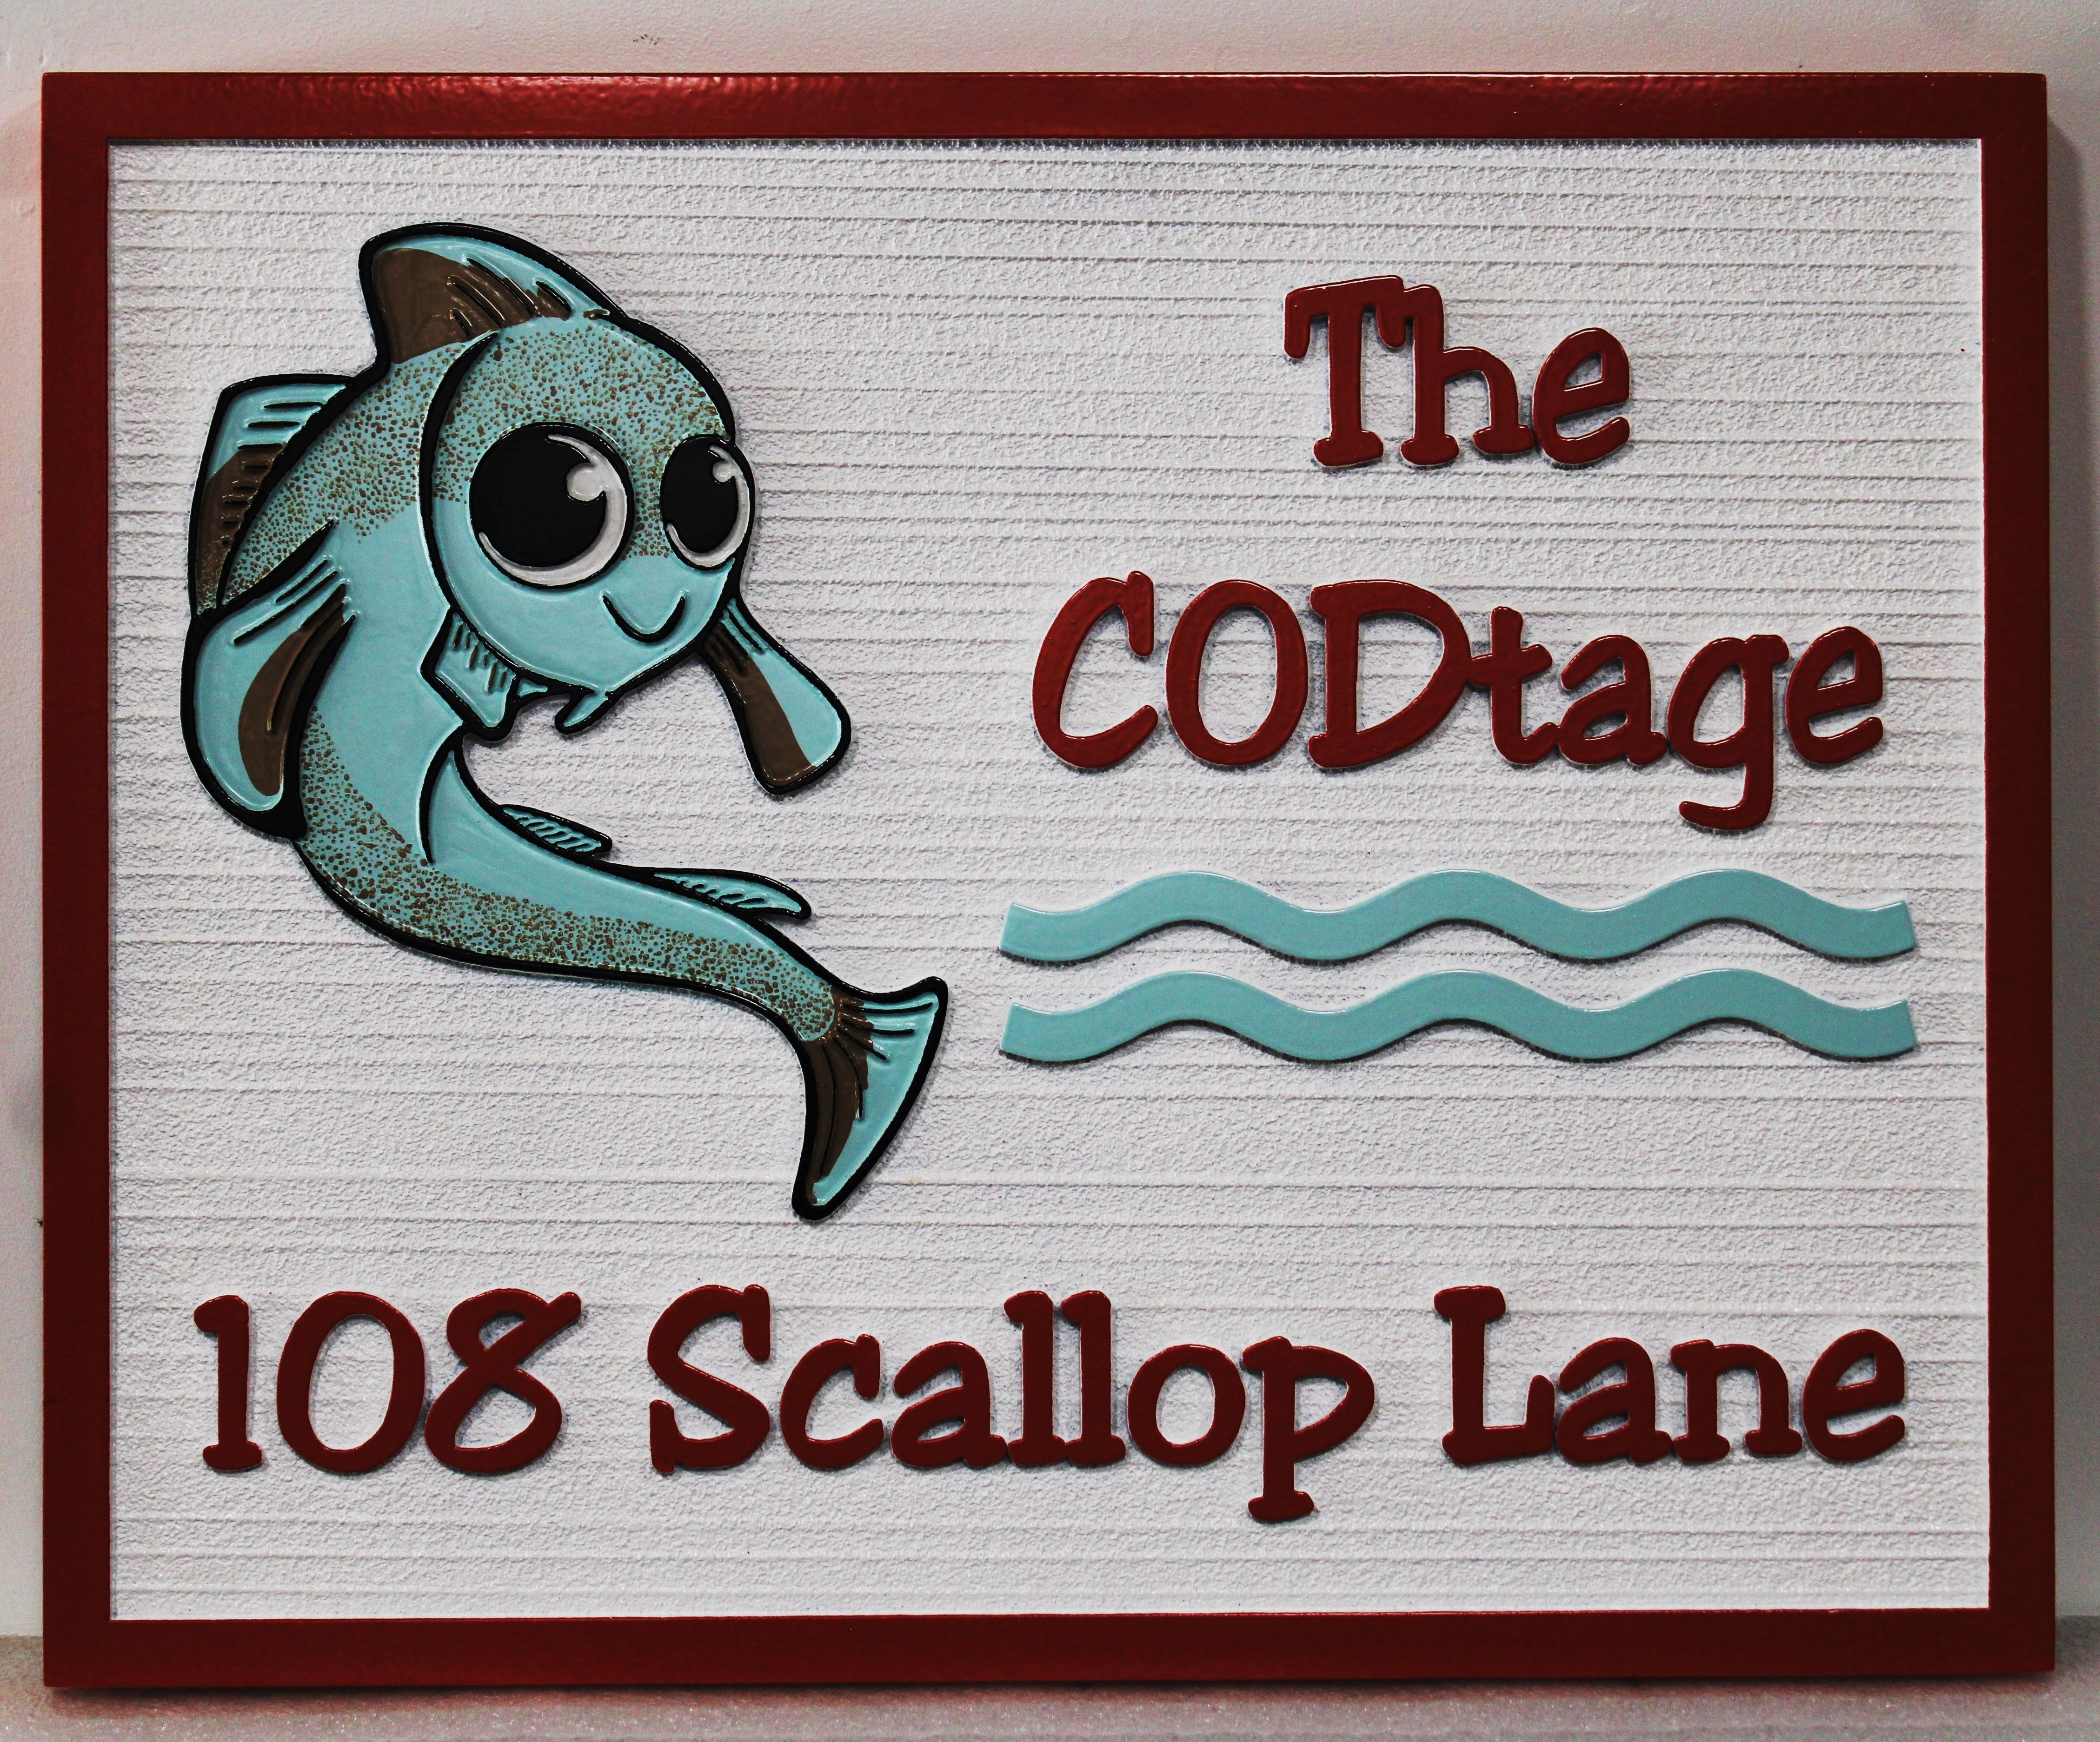 L21394  - Carved R2.50D Raised Relief and Sandblasted Wood Grain HDU Address Sign  for "The CODtage" for a Coastal Residence